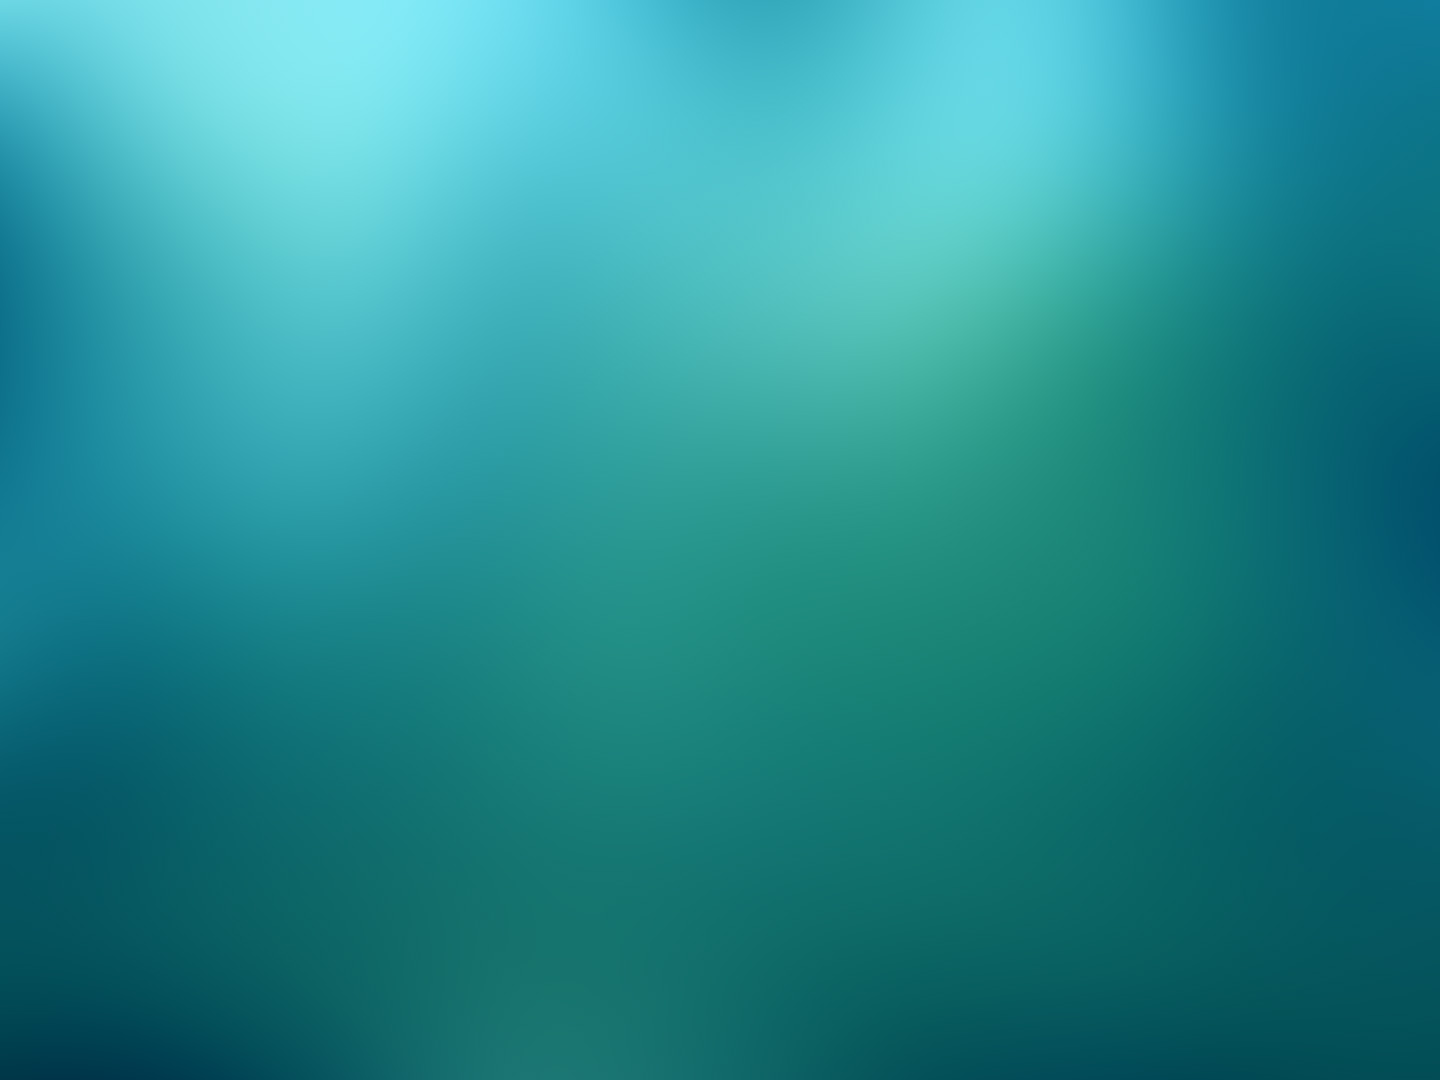 Blurry blue green Free PPT Backgrounds for your PowerPoint Templates